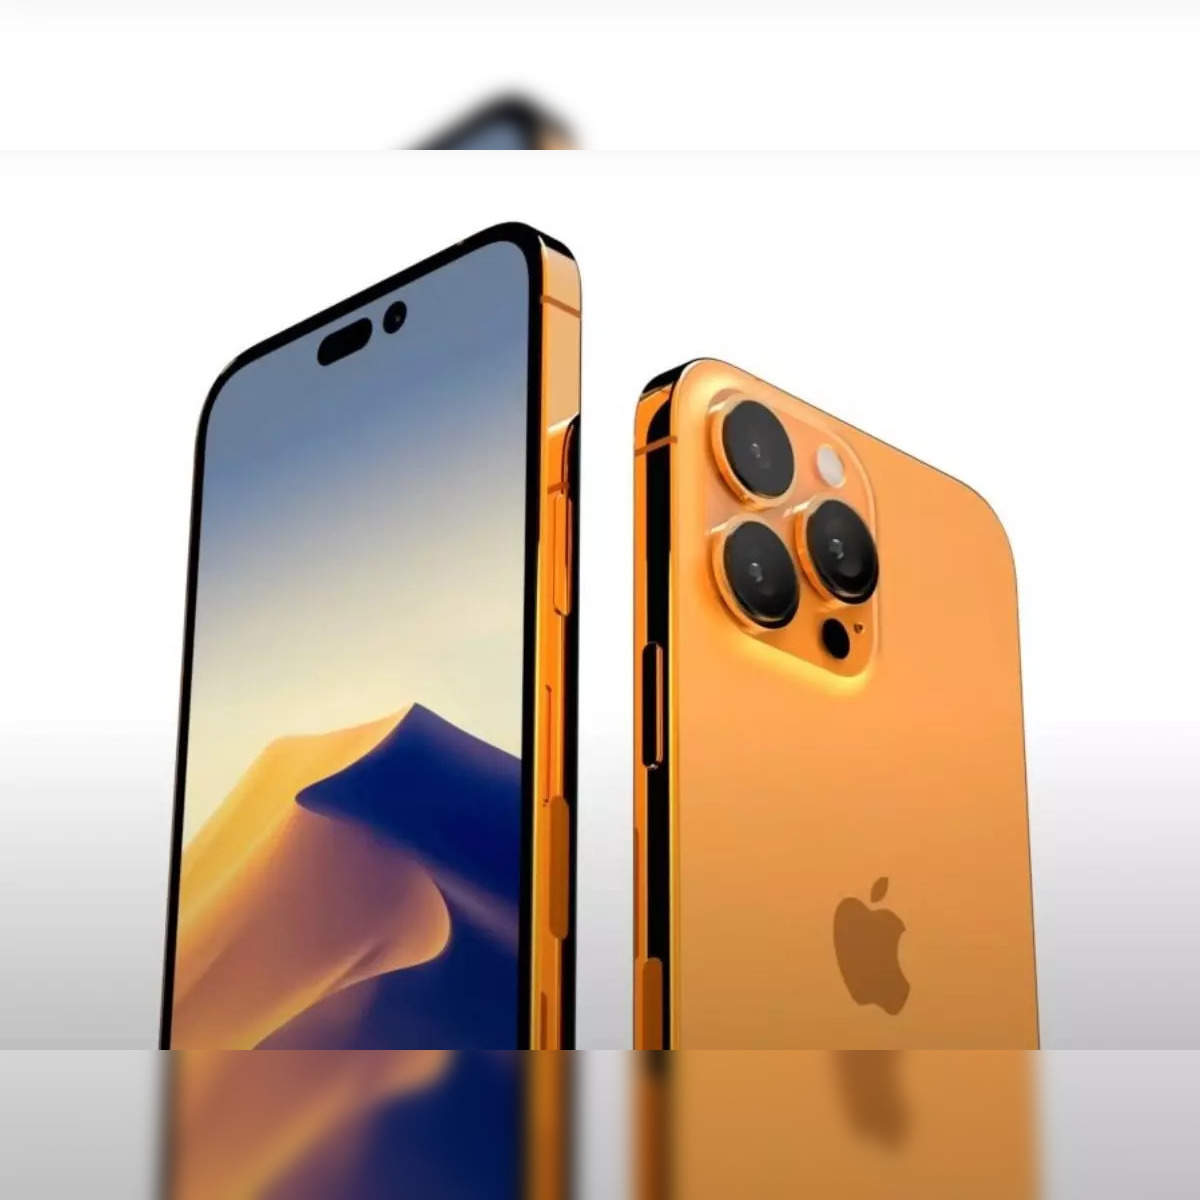 iphone 14 pro: Apple to offer bigger screens on iPhone 14 Pro